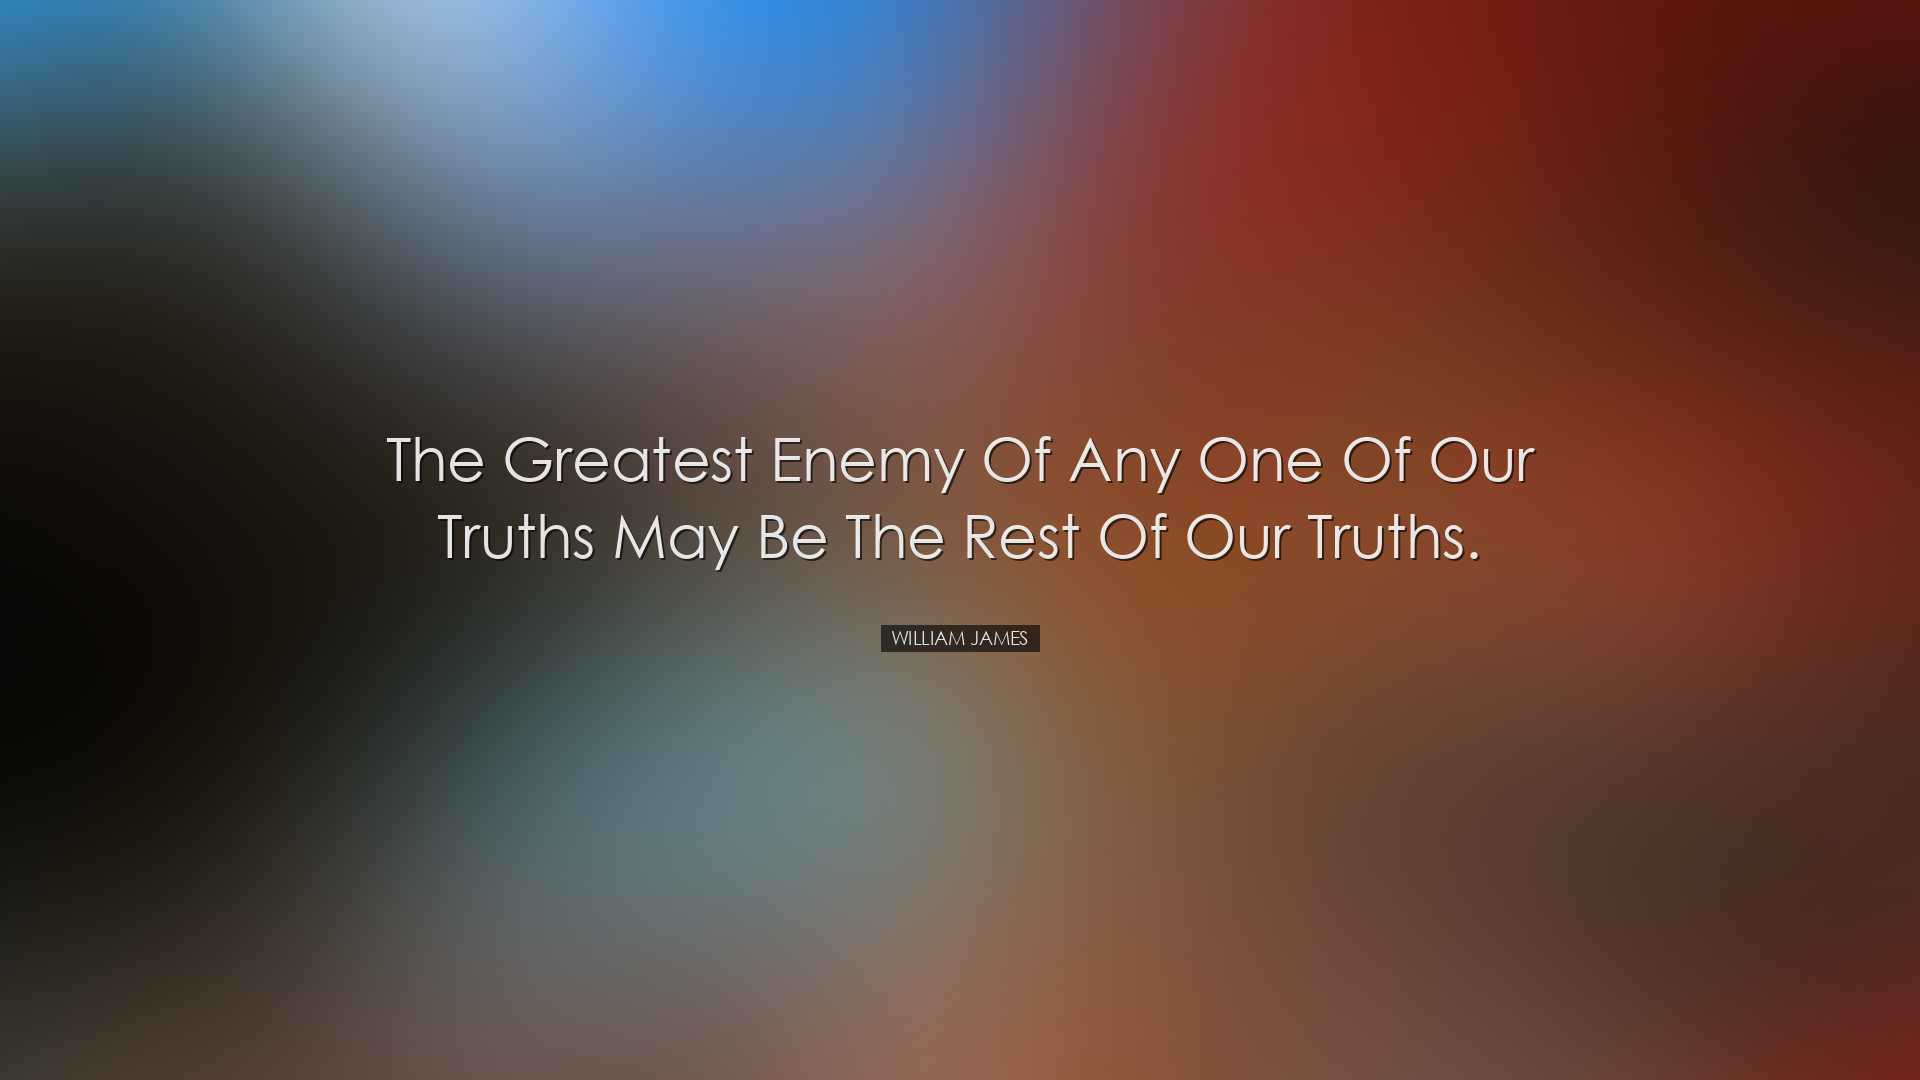 The greatest enemy of any one of our truths may be the rest of our